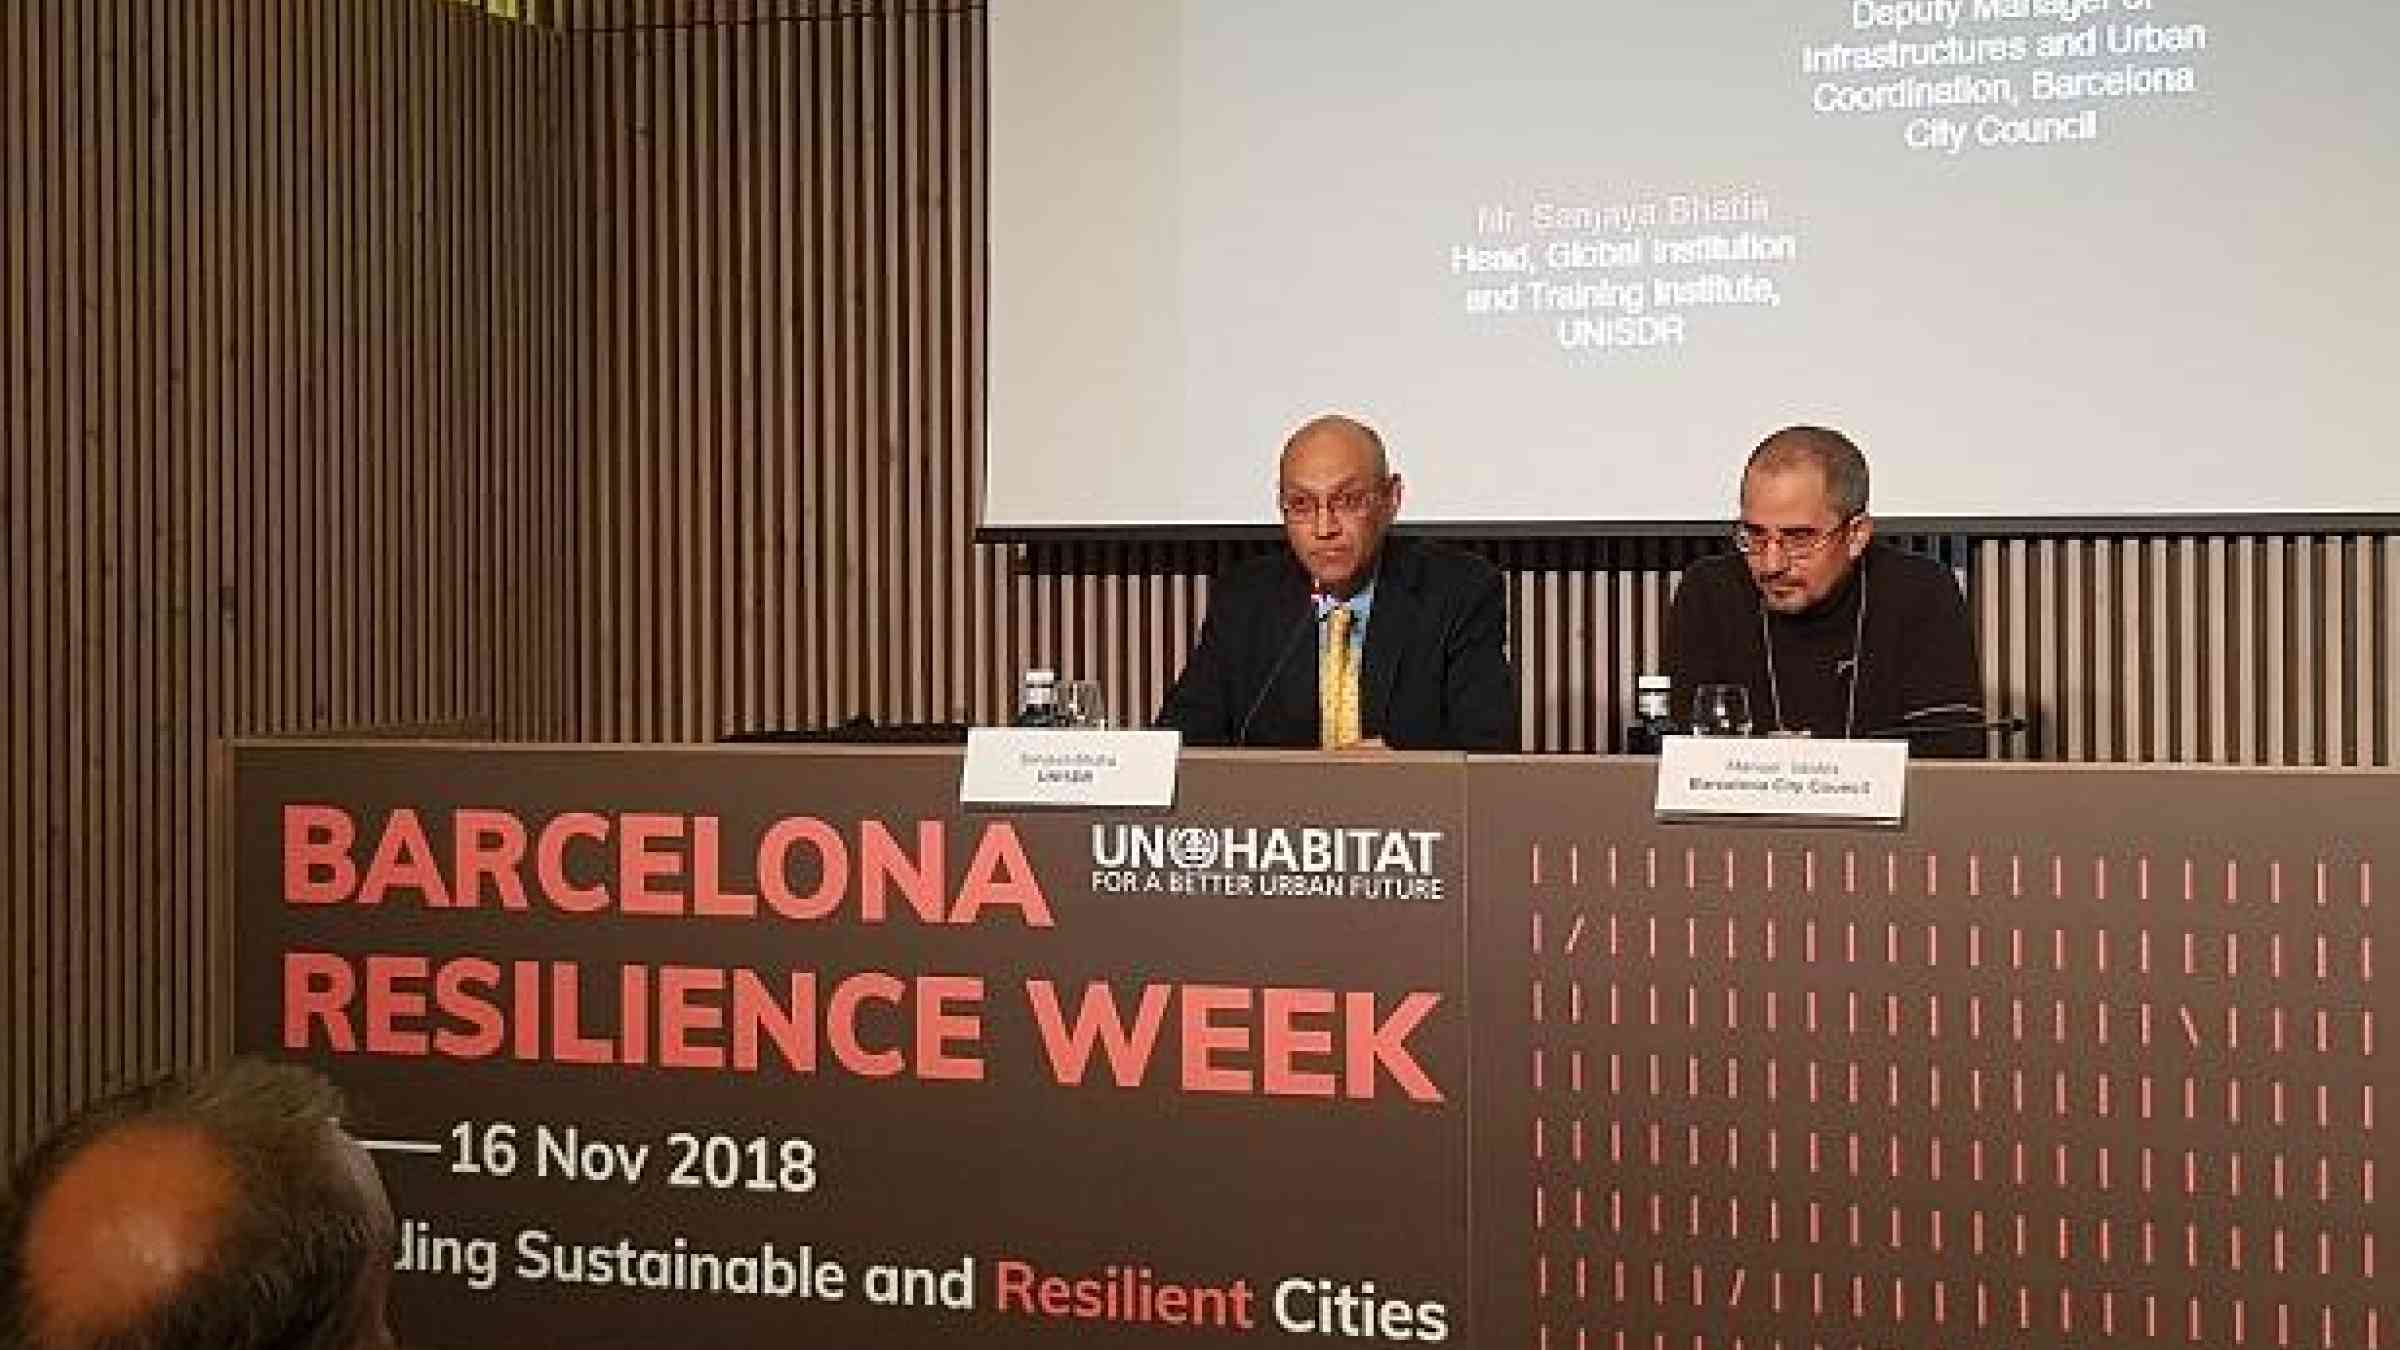 Sanjaya Bhatia, UNISDR and Manuel Valdes, Barcelona City Council, speaking at the opening of Barcelona Resilience Week